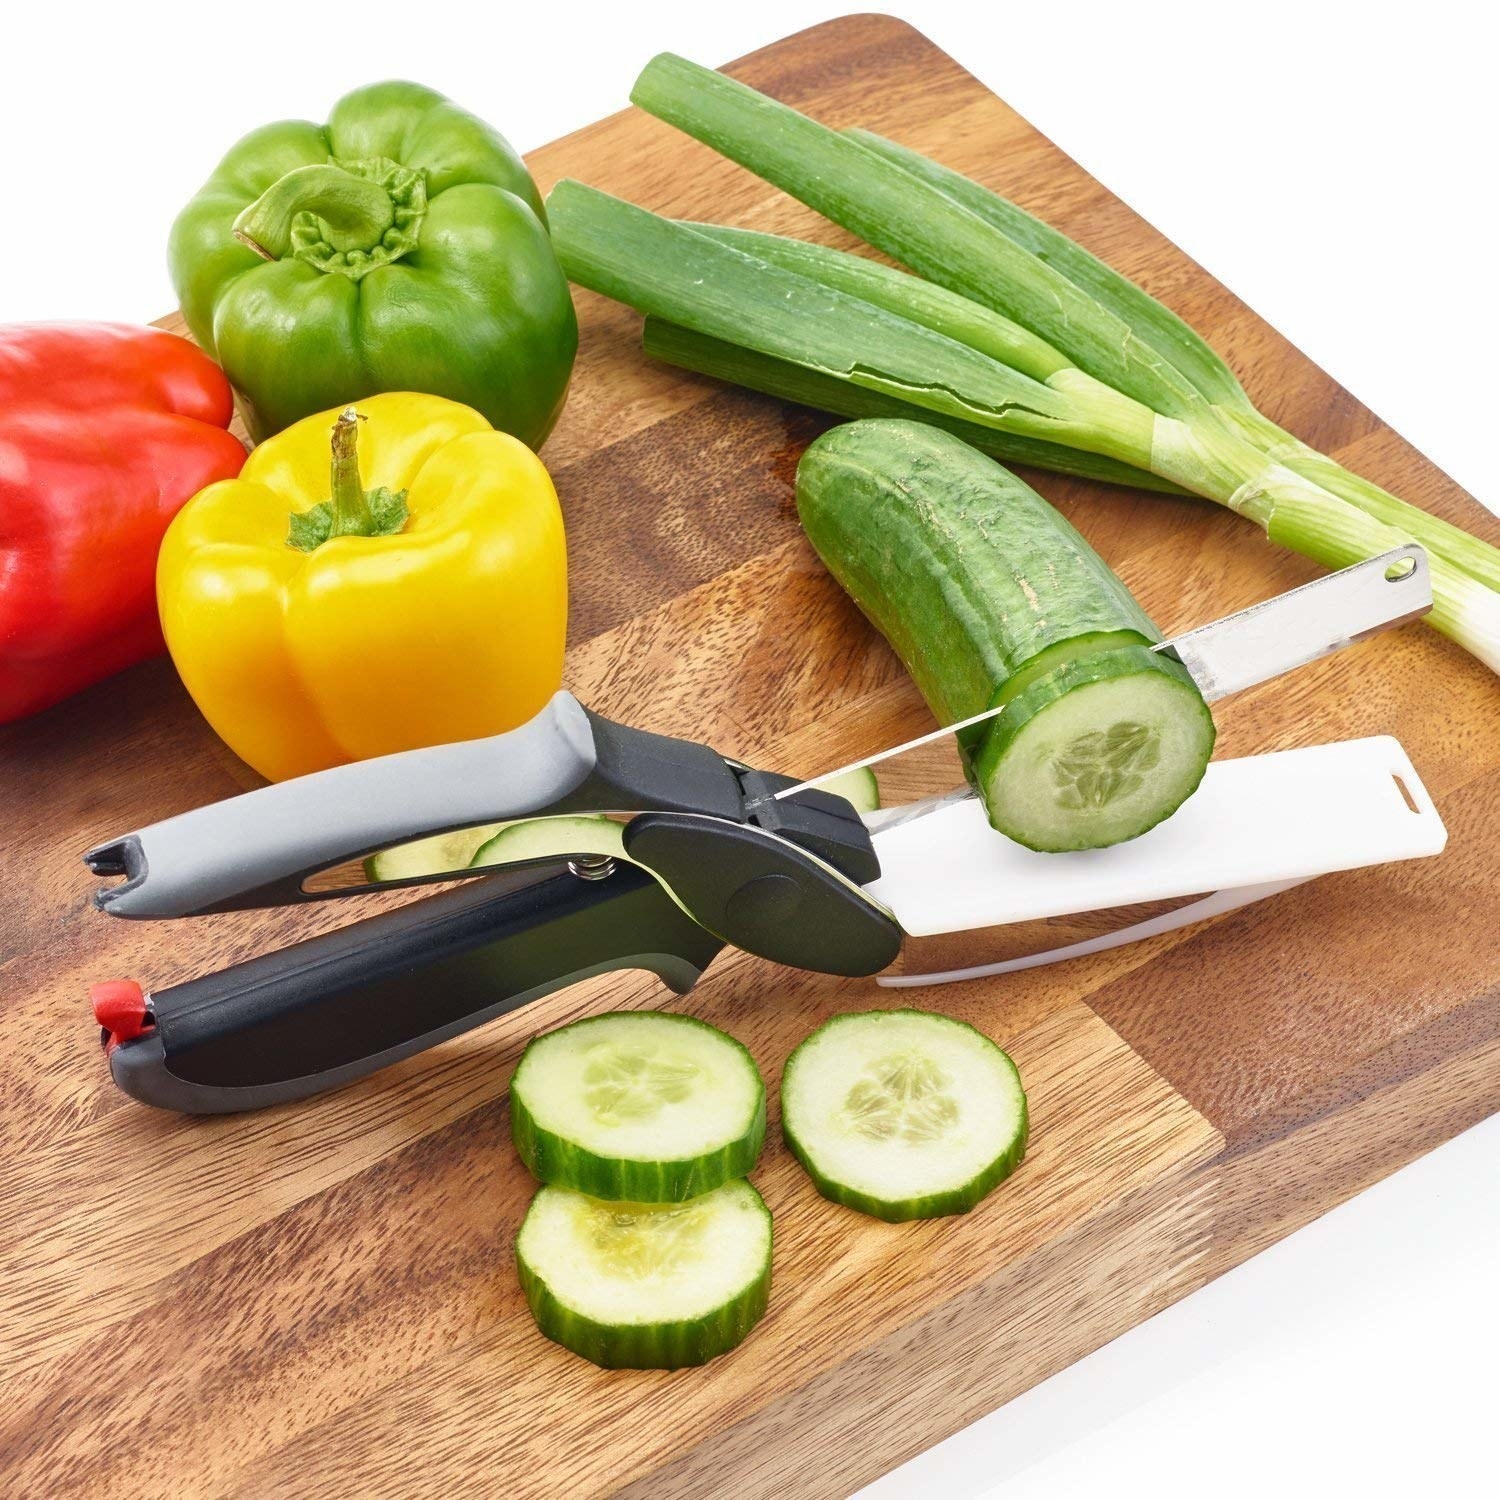 The spring action knife pictured with a sliced cucumber.